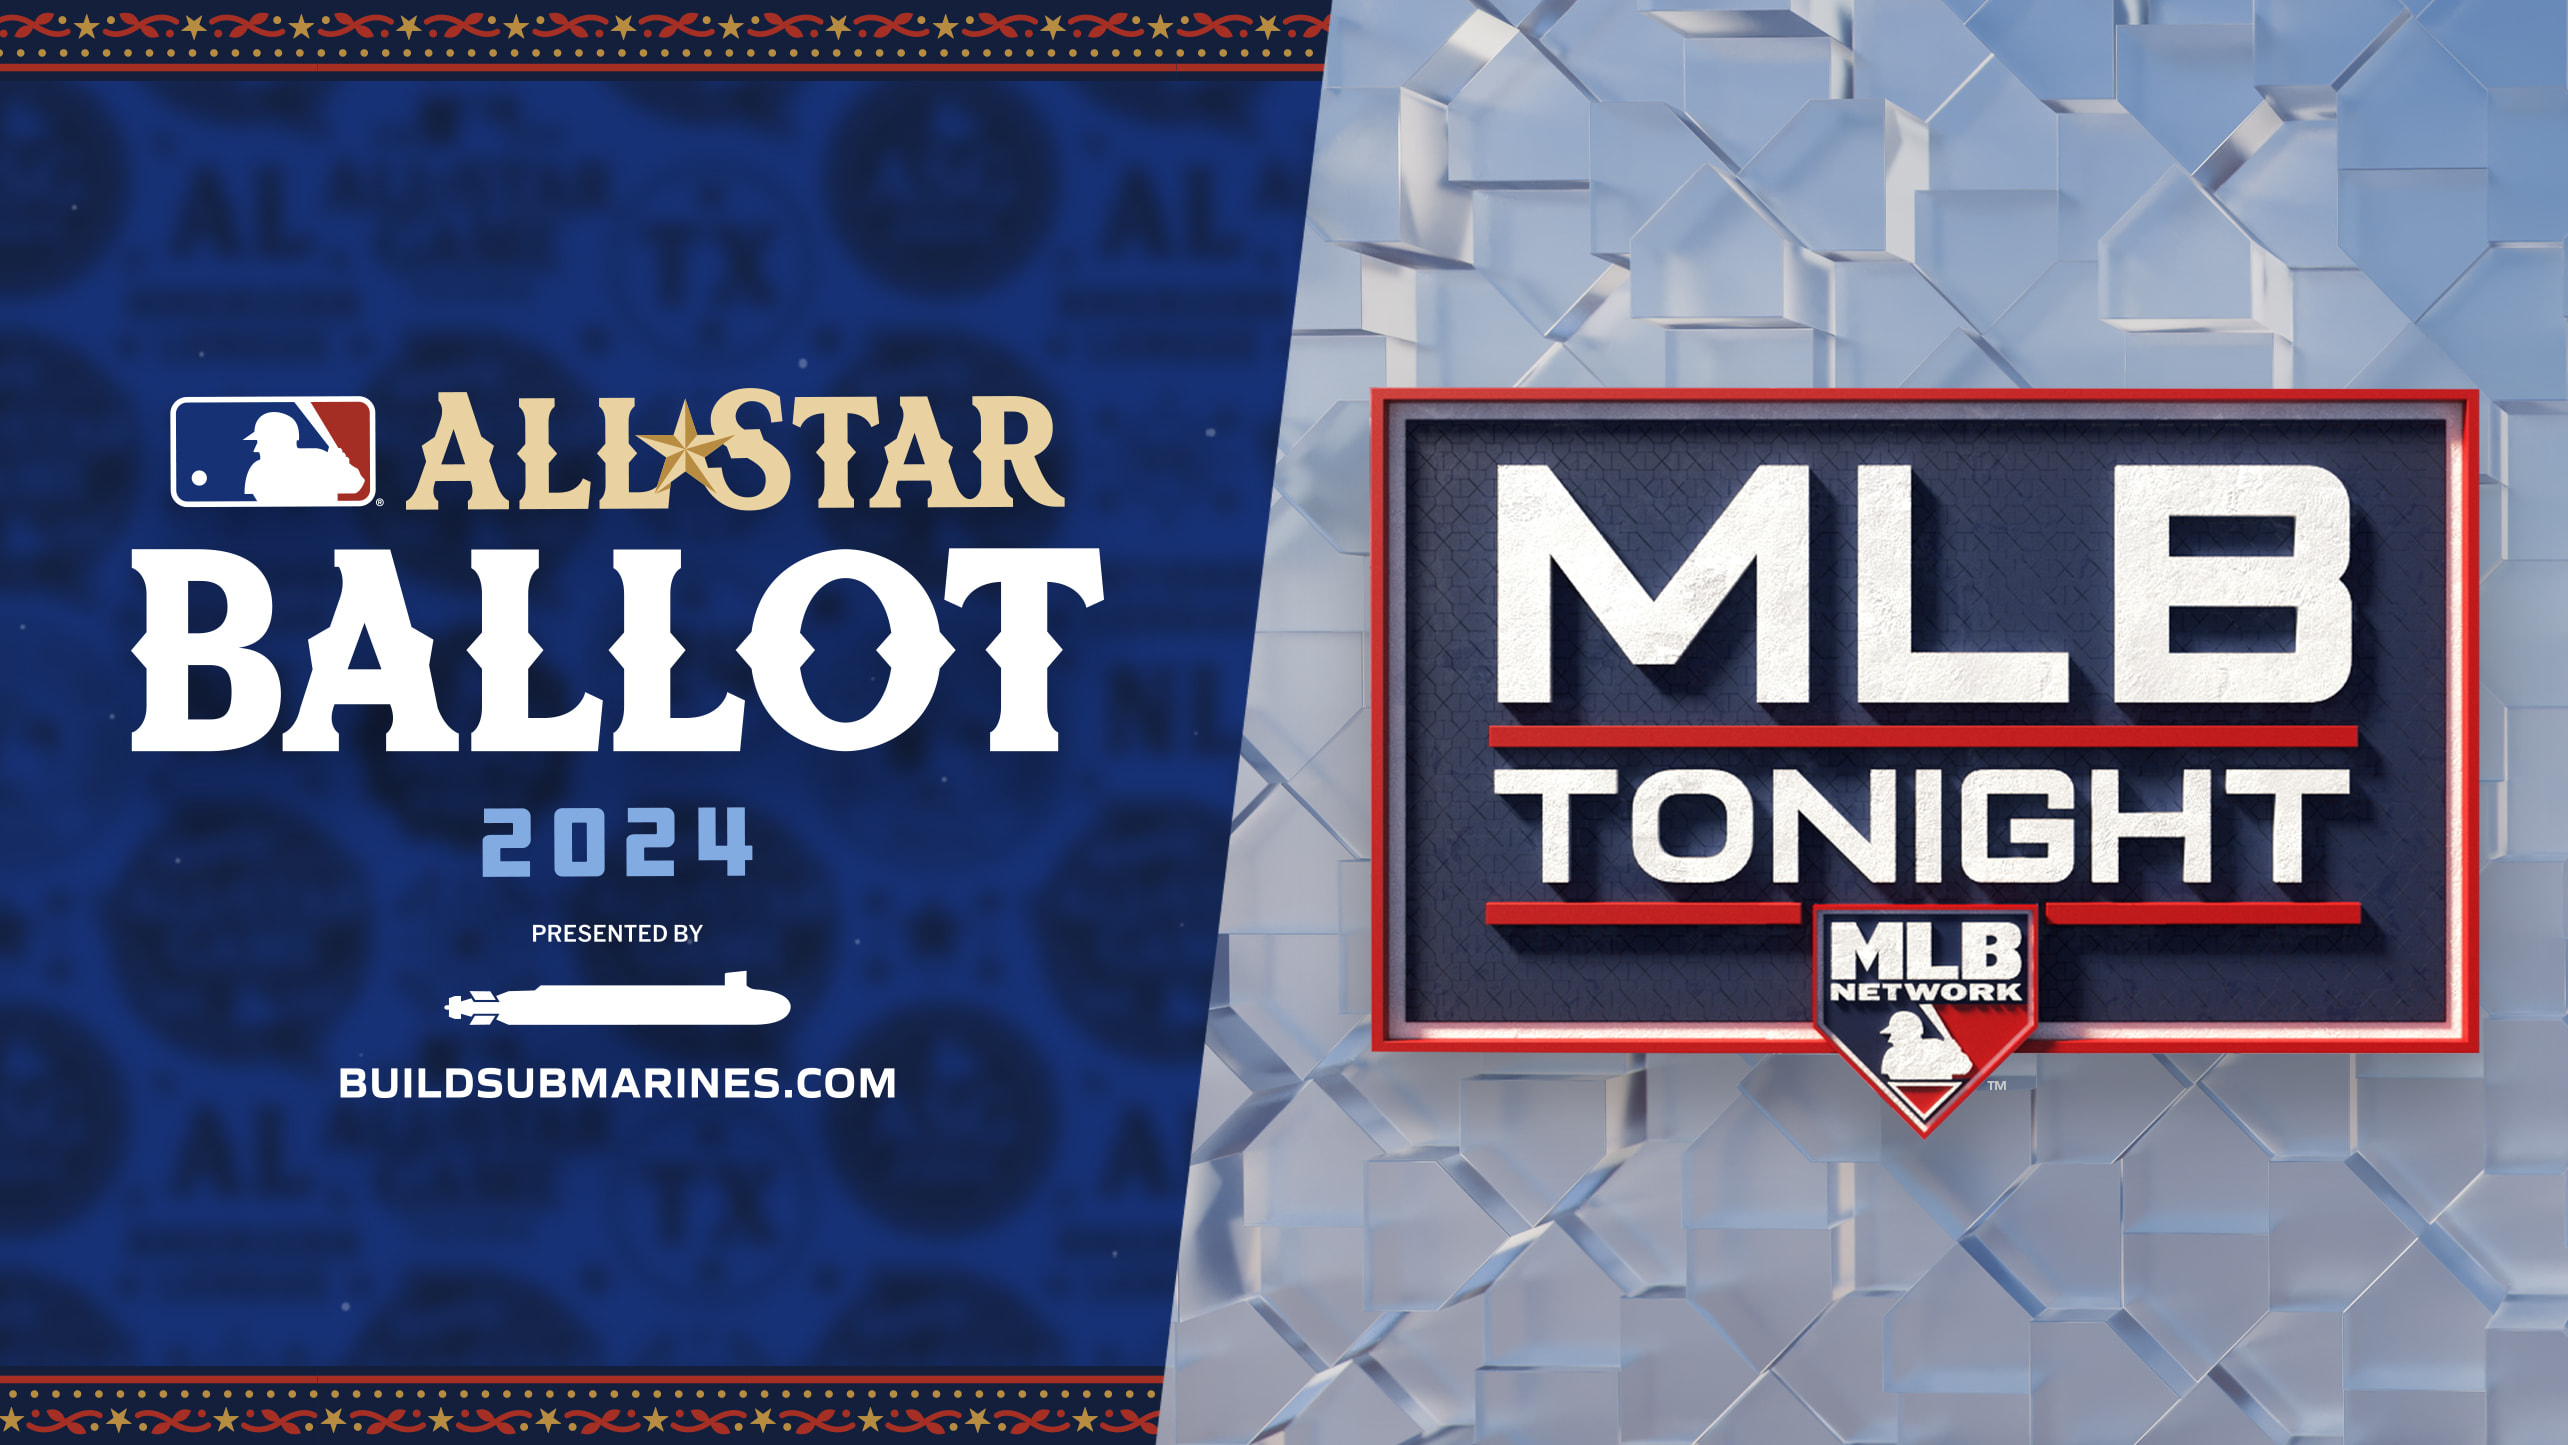 All-Star ballot finalists revealed on MLB Network